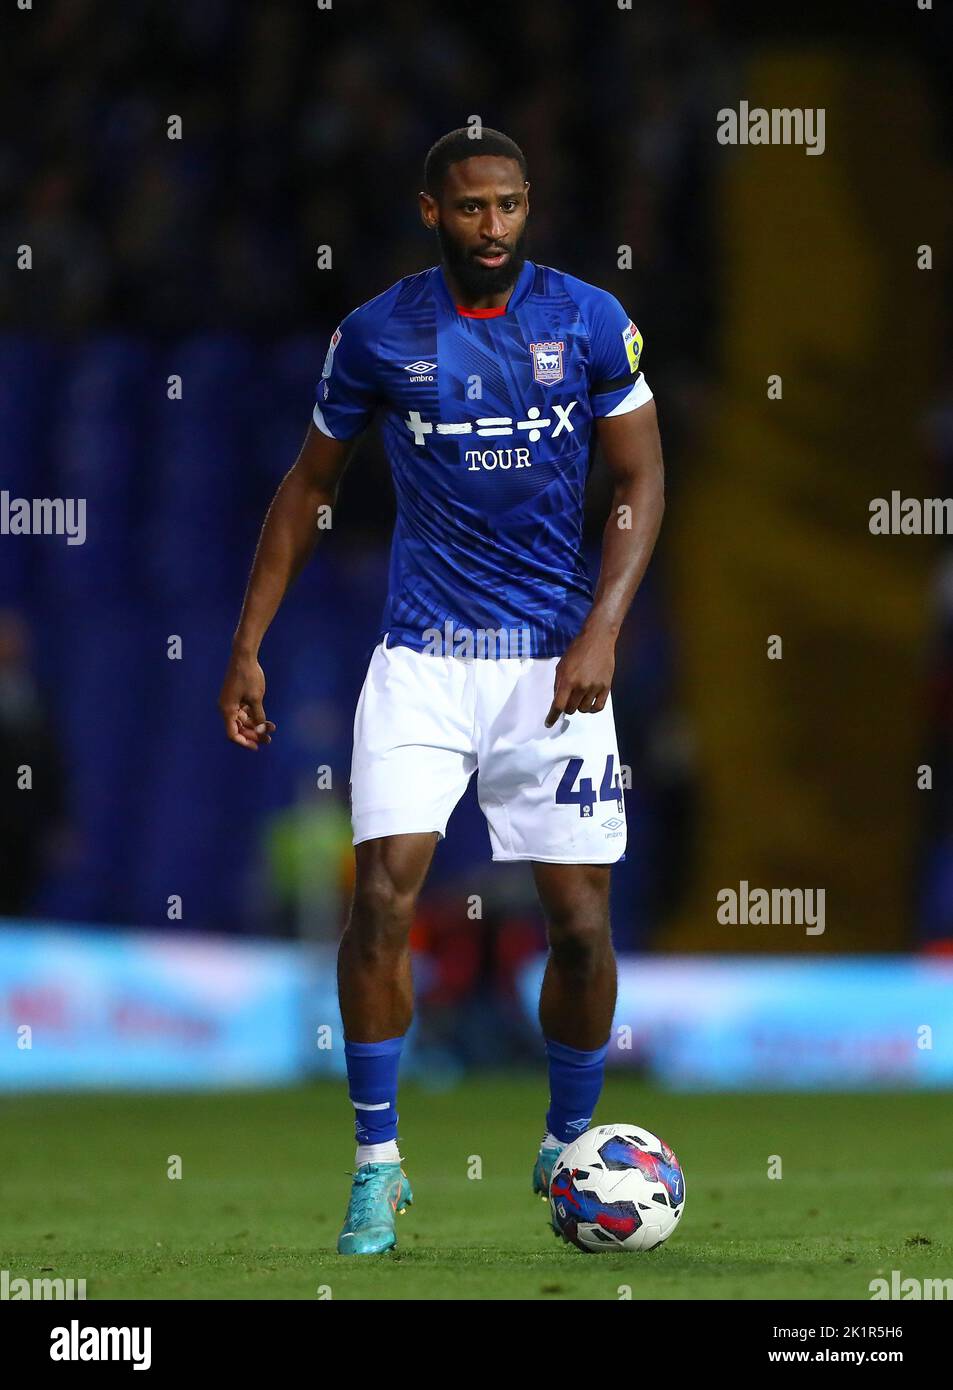 Janoi Donacien of Ipswich Town - Ipswich Town v Bristol Rovers, Sky Bet League One, Portman Road, Ipswich, UK - 13th September 2022  Editorial Use Only - DataCo restrictions apply Stock Photo